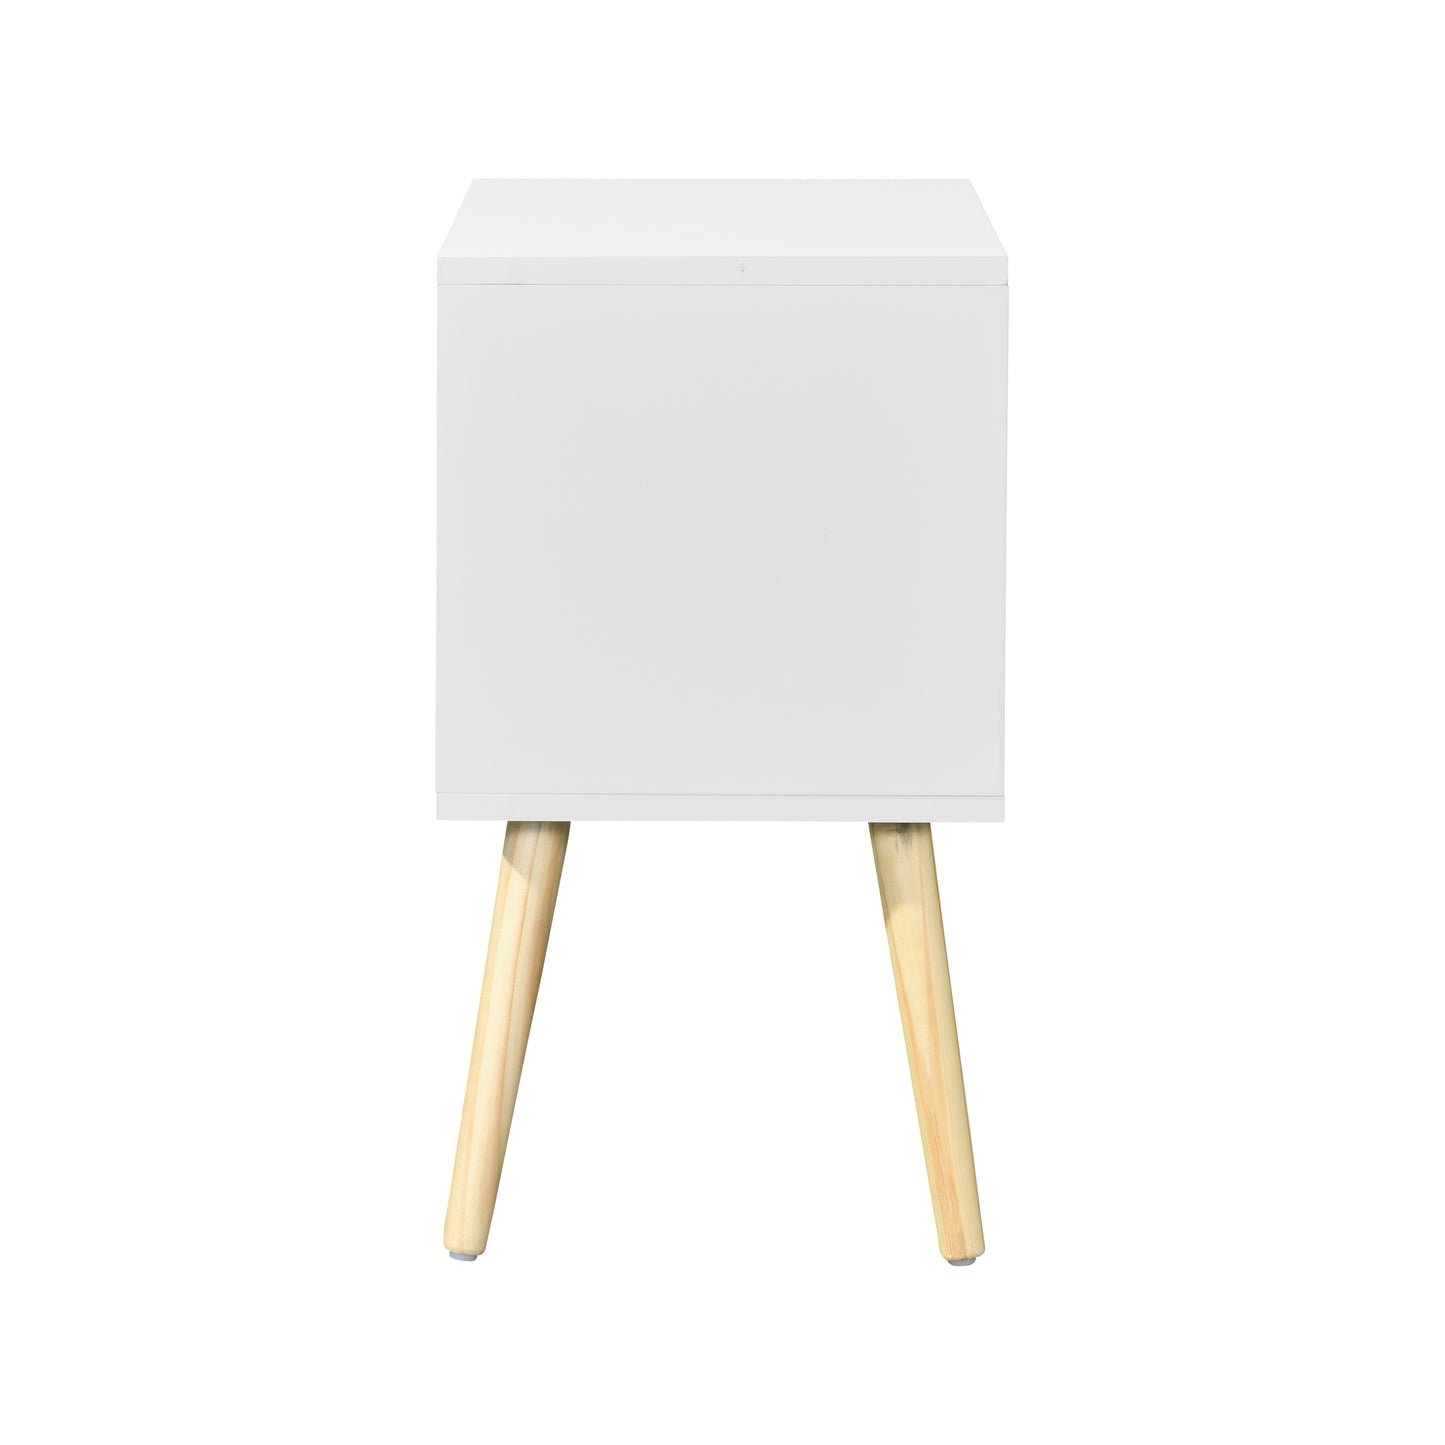 Side Table with 2 Drawer and Rubber Wood Legs, Mid-Century Modern Storage Cabinet for Bedroom Living Room Furniture, White